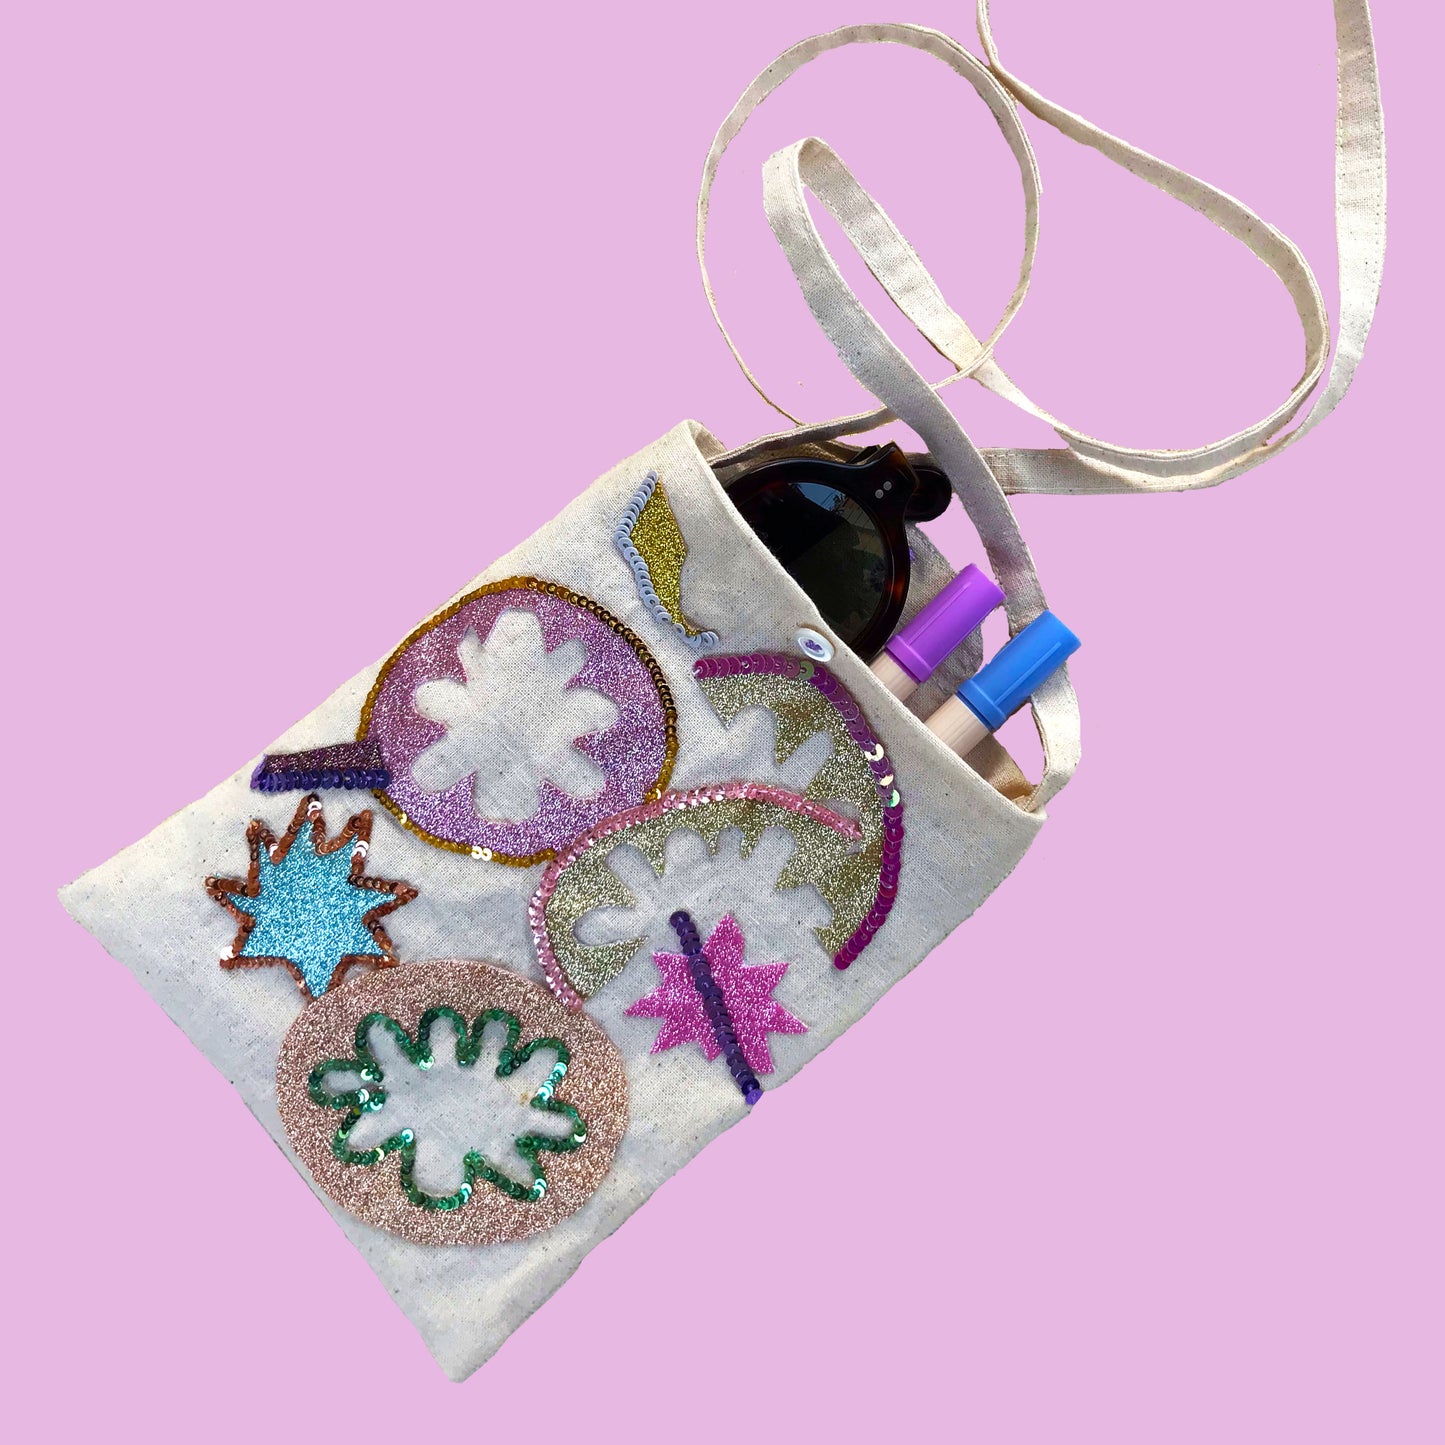 'Cloudy flowers' mobile sling bag